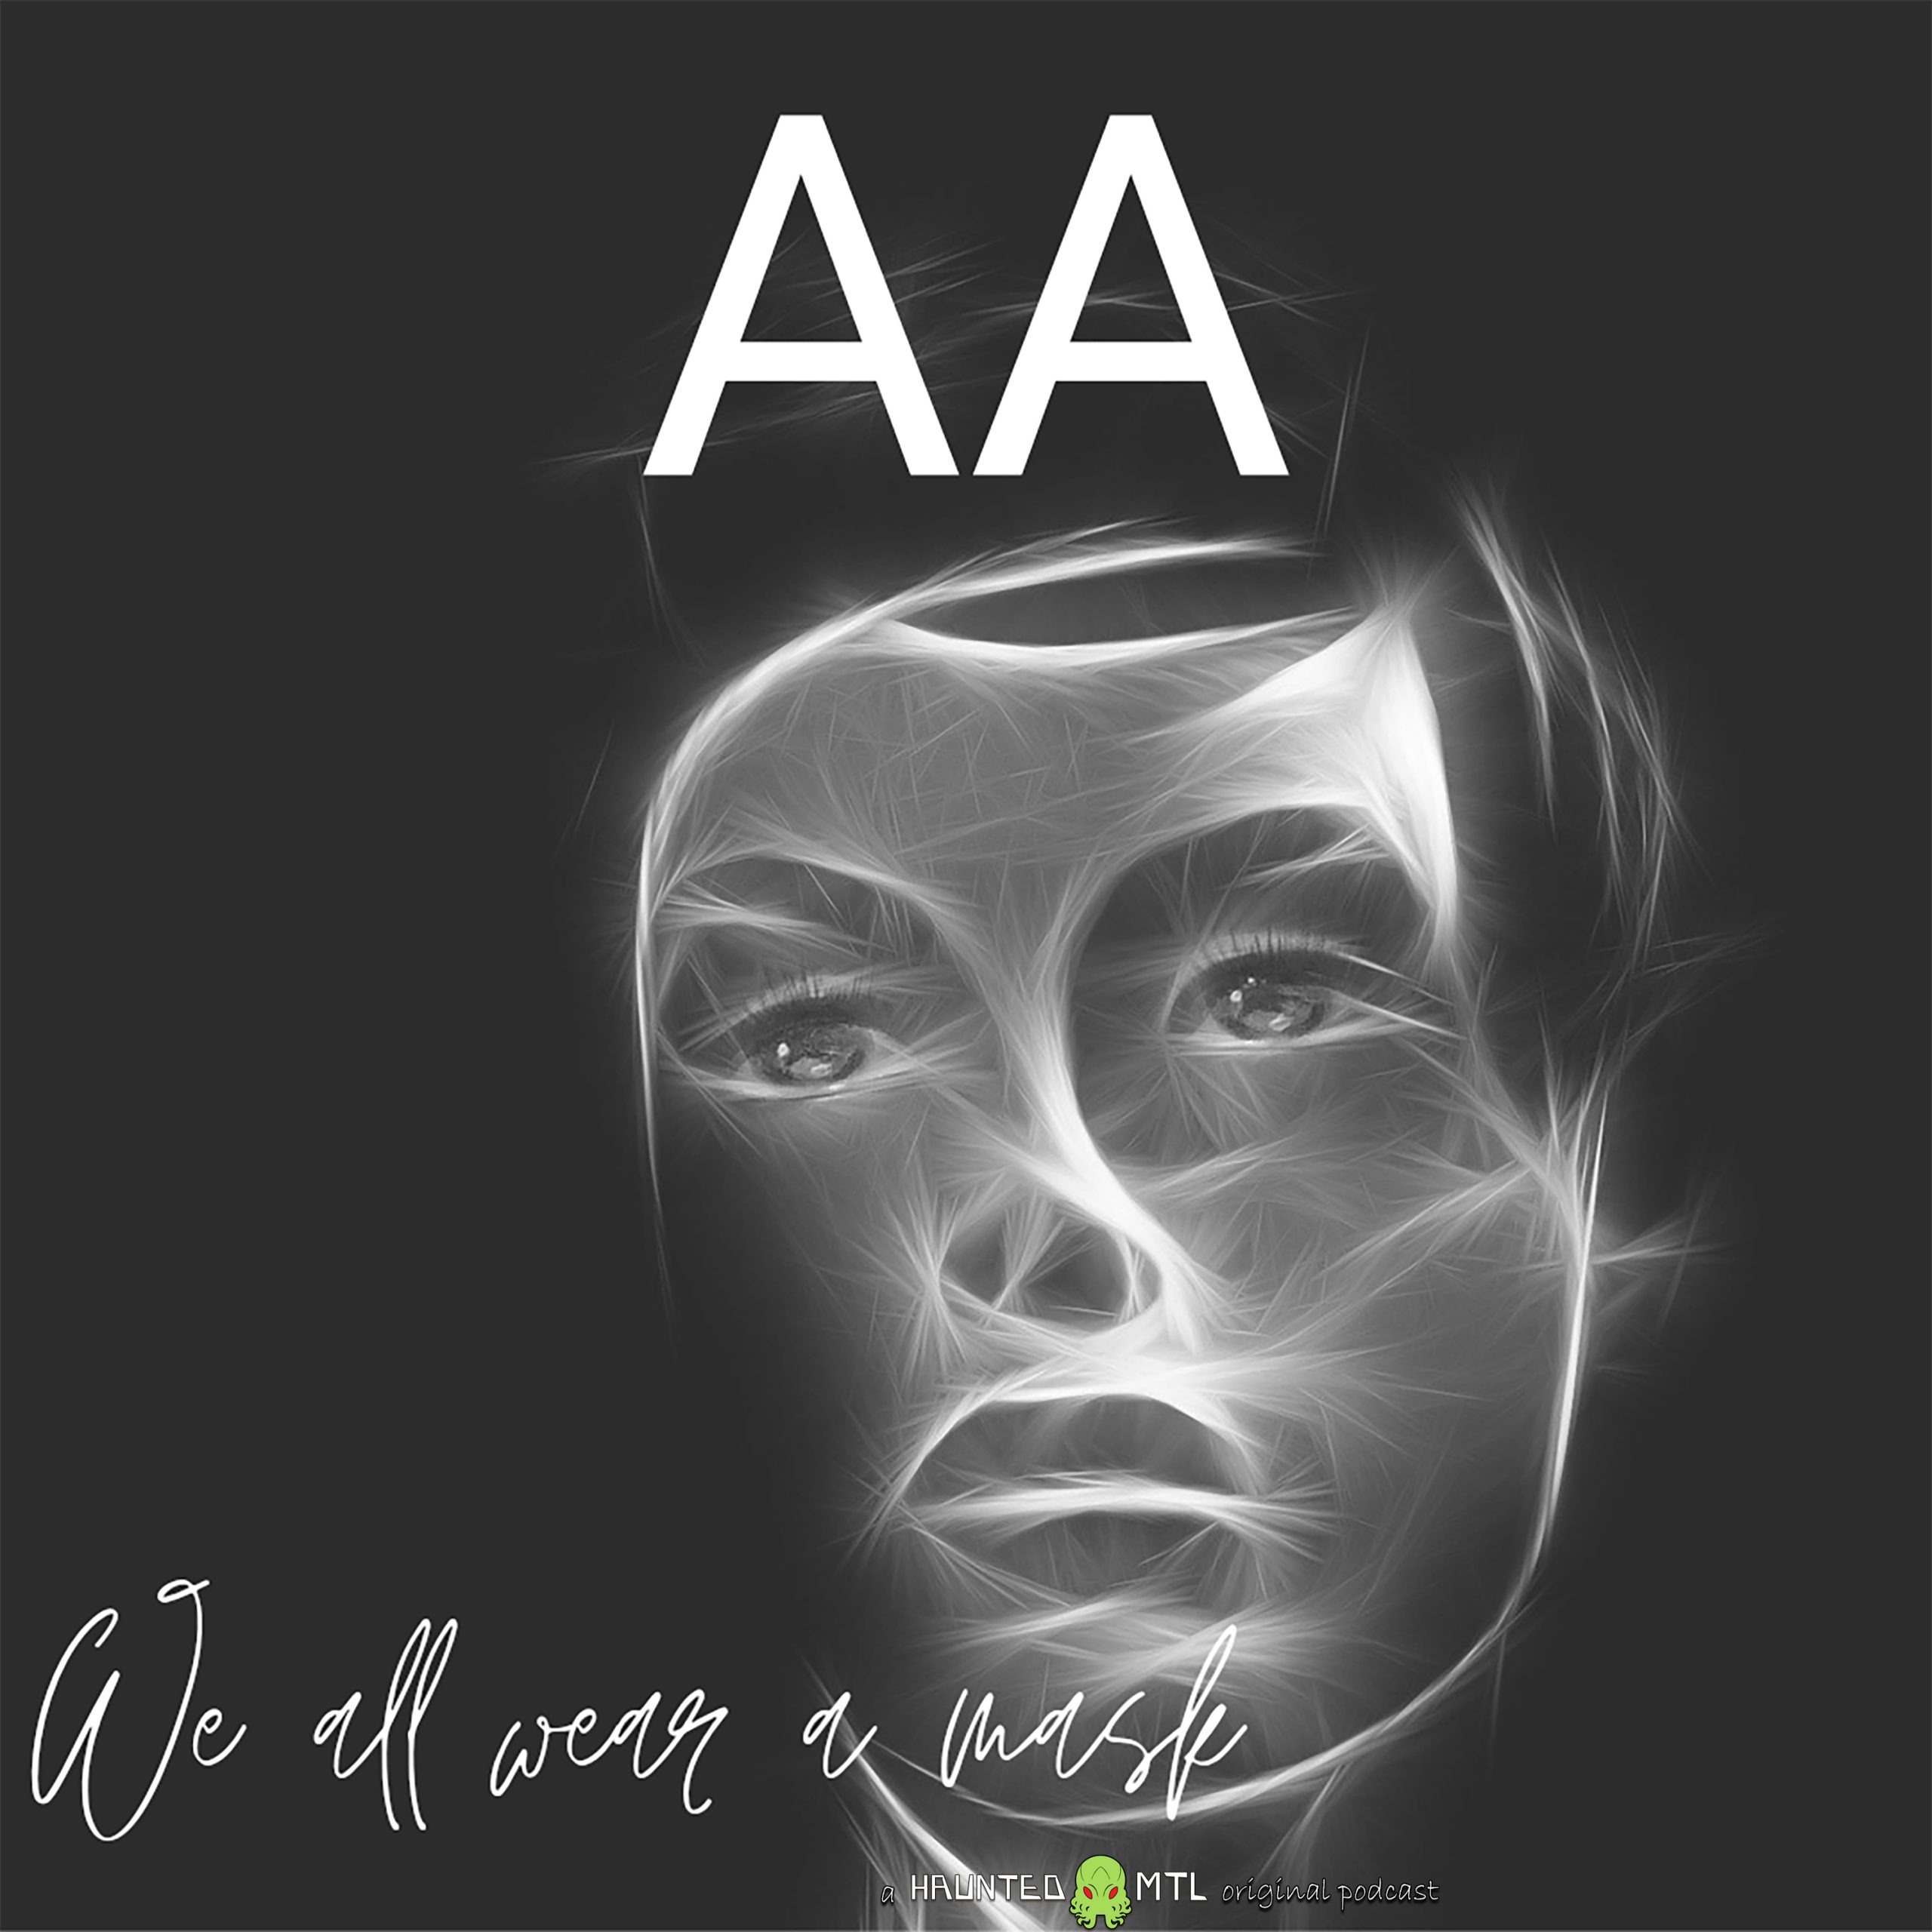 AA original horror radio show 'we all wear a mask' with a face made from white light lines